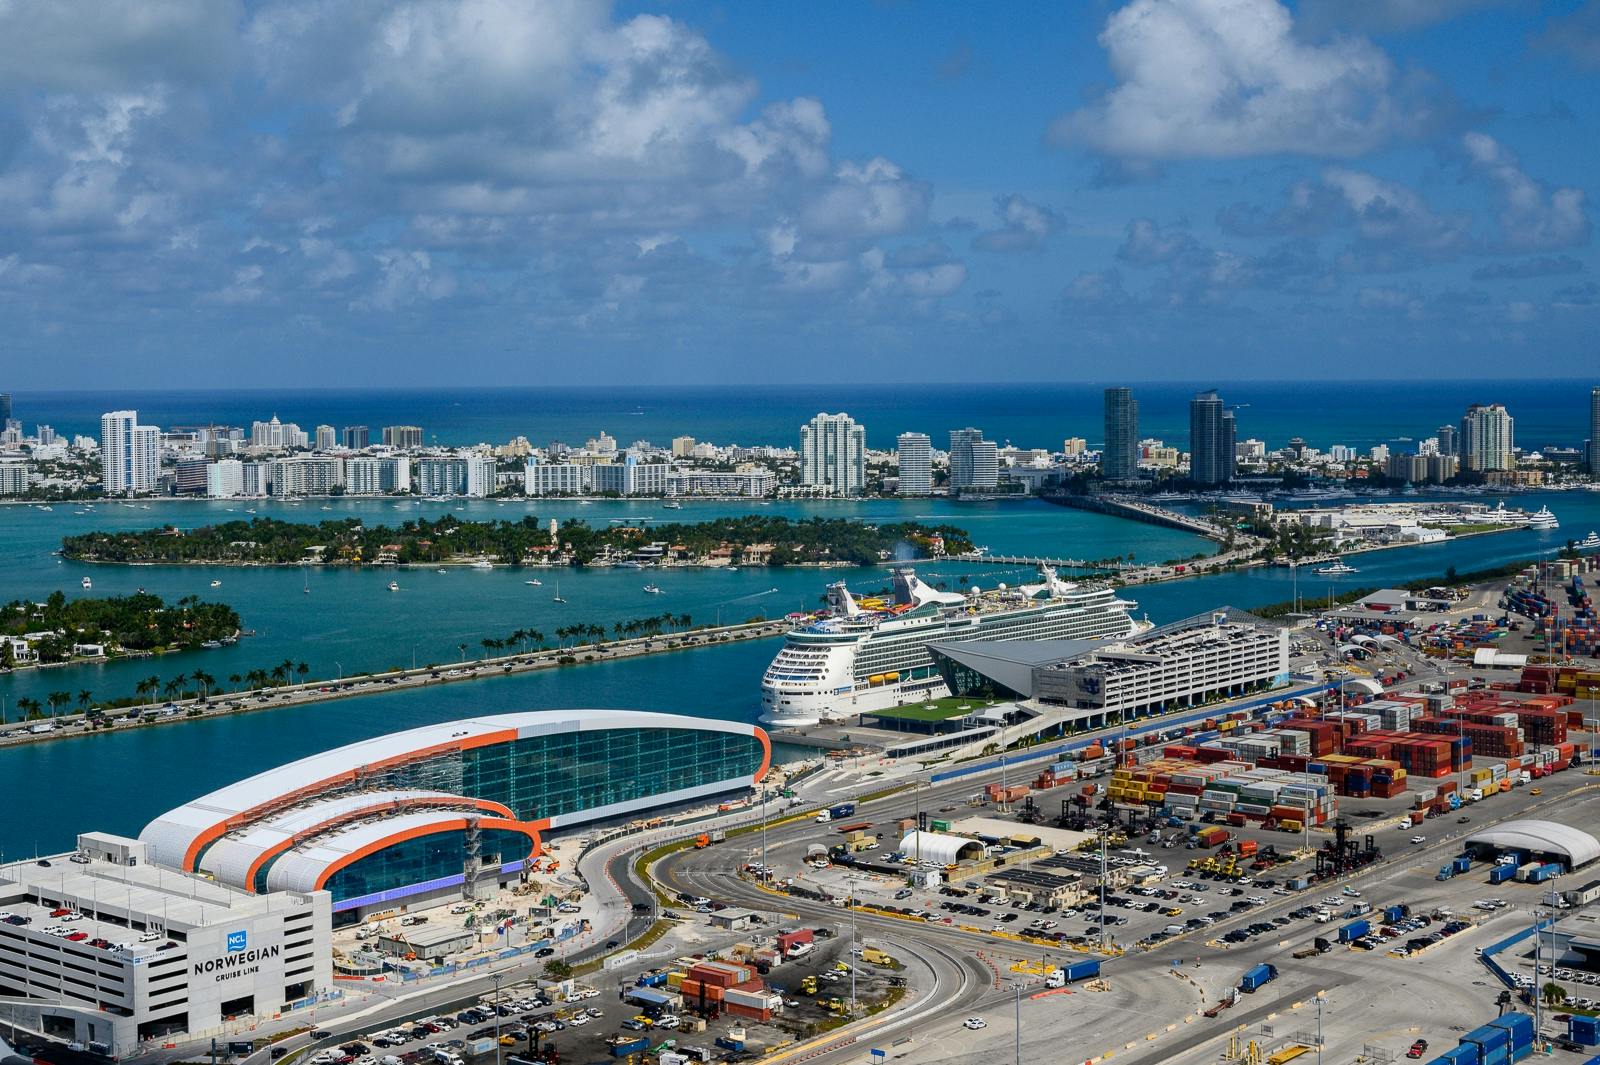 Ocean and city views 1 hour helicopter tour from Fort Lauderdale Musement